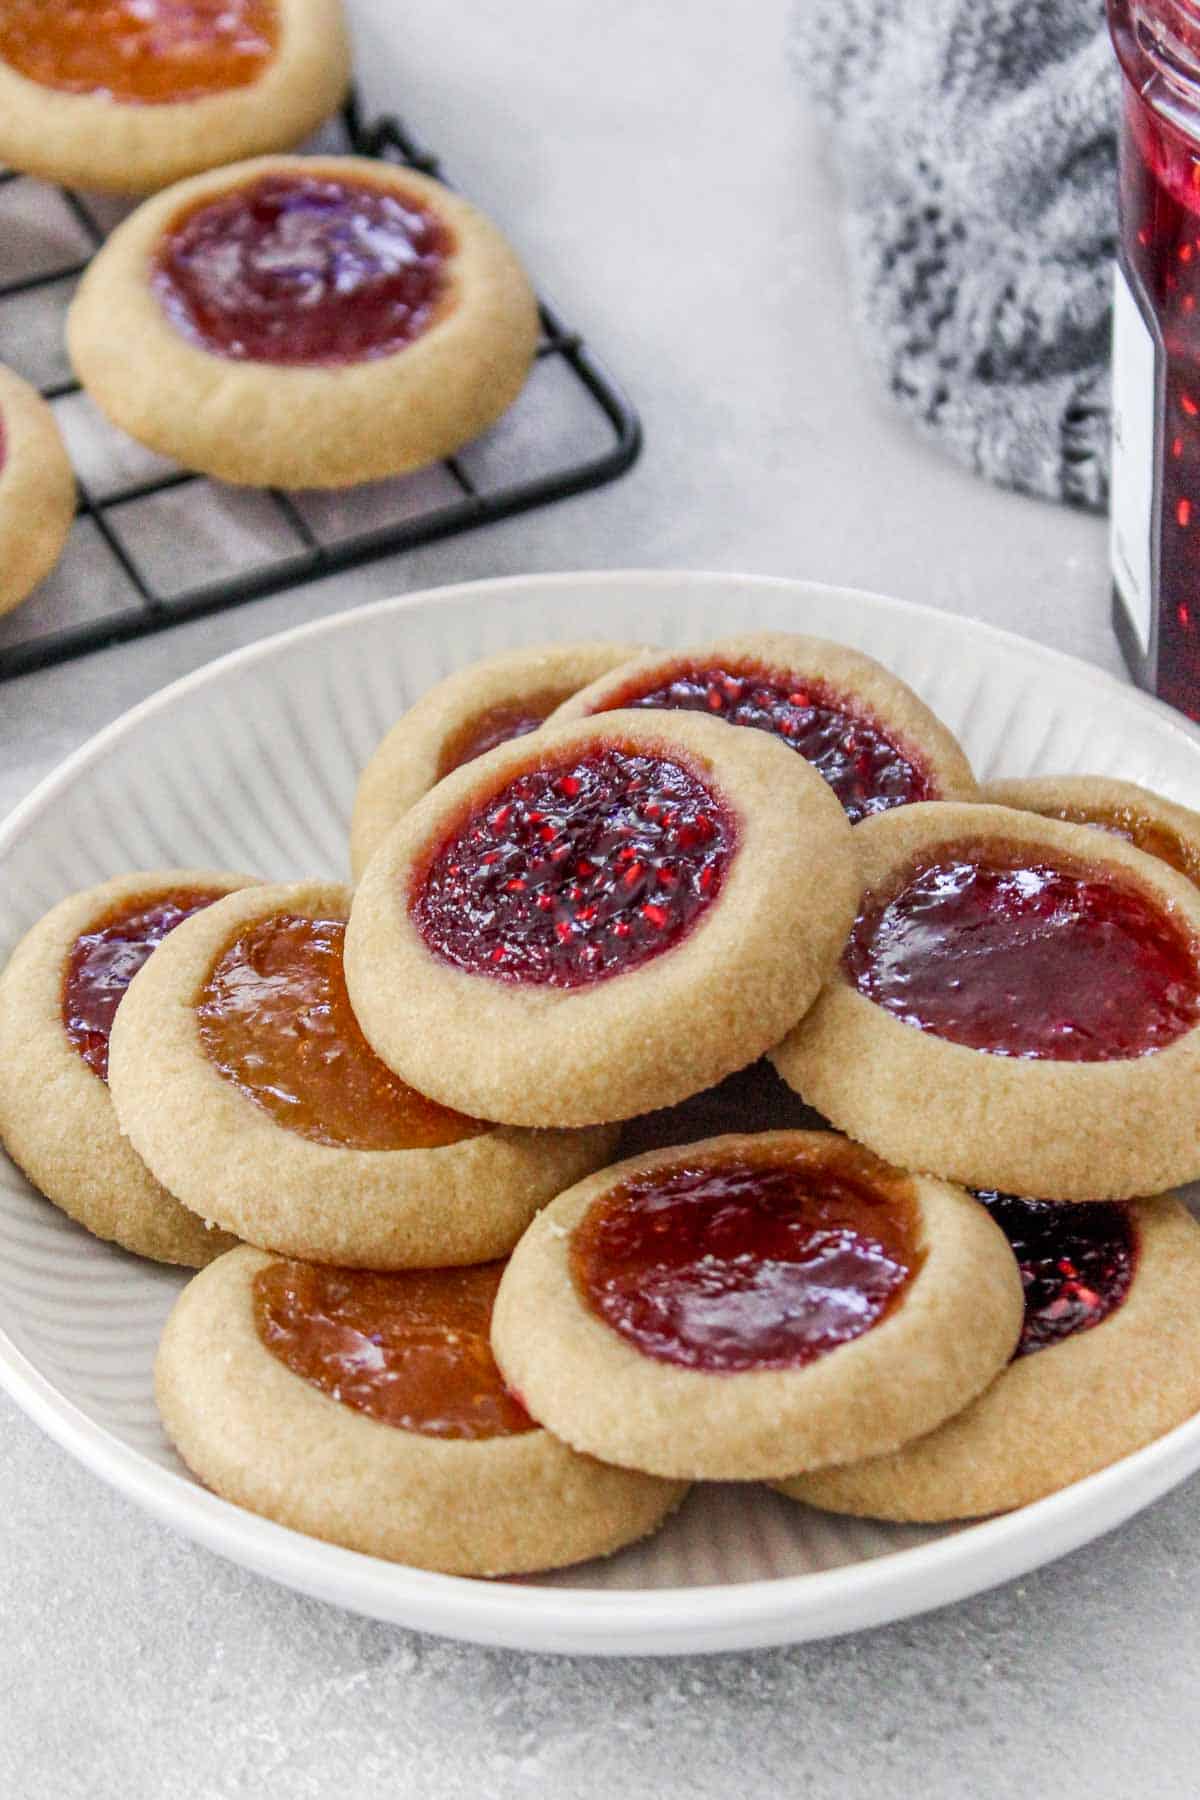 Thumbprint cookies on a plate with a wire rack of more cookies and a jar of jam nearby.